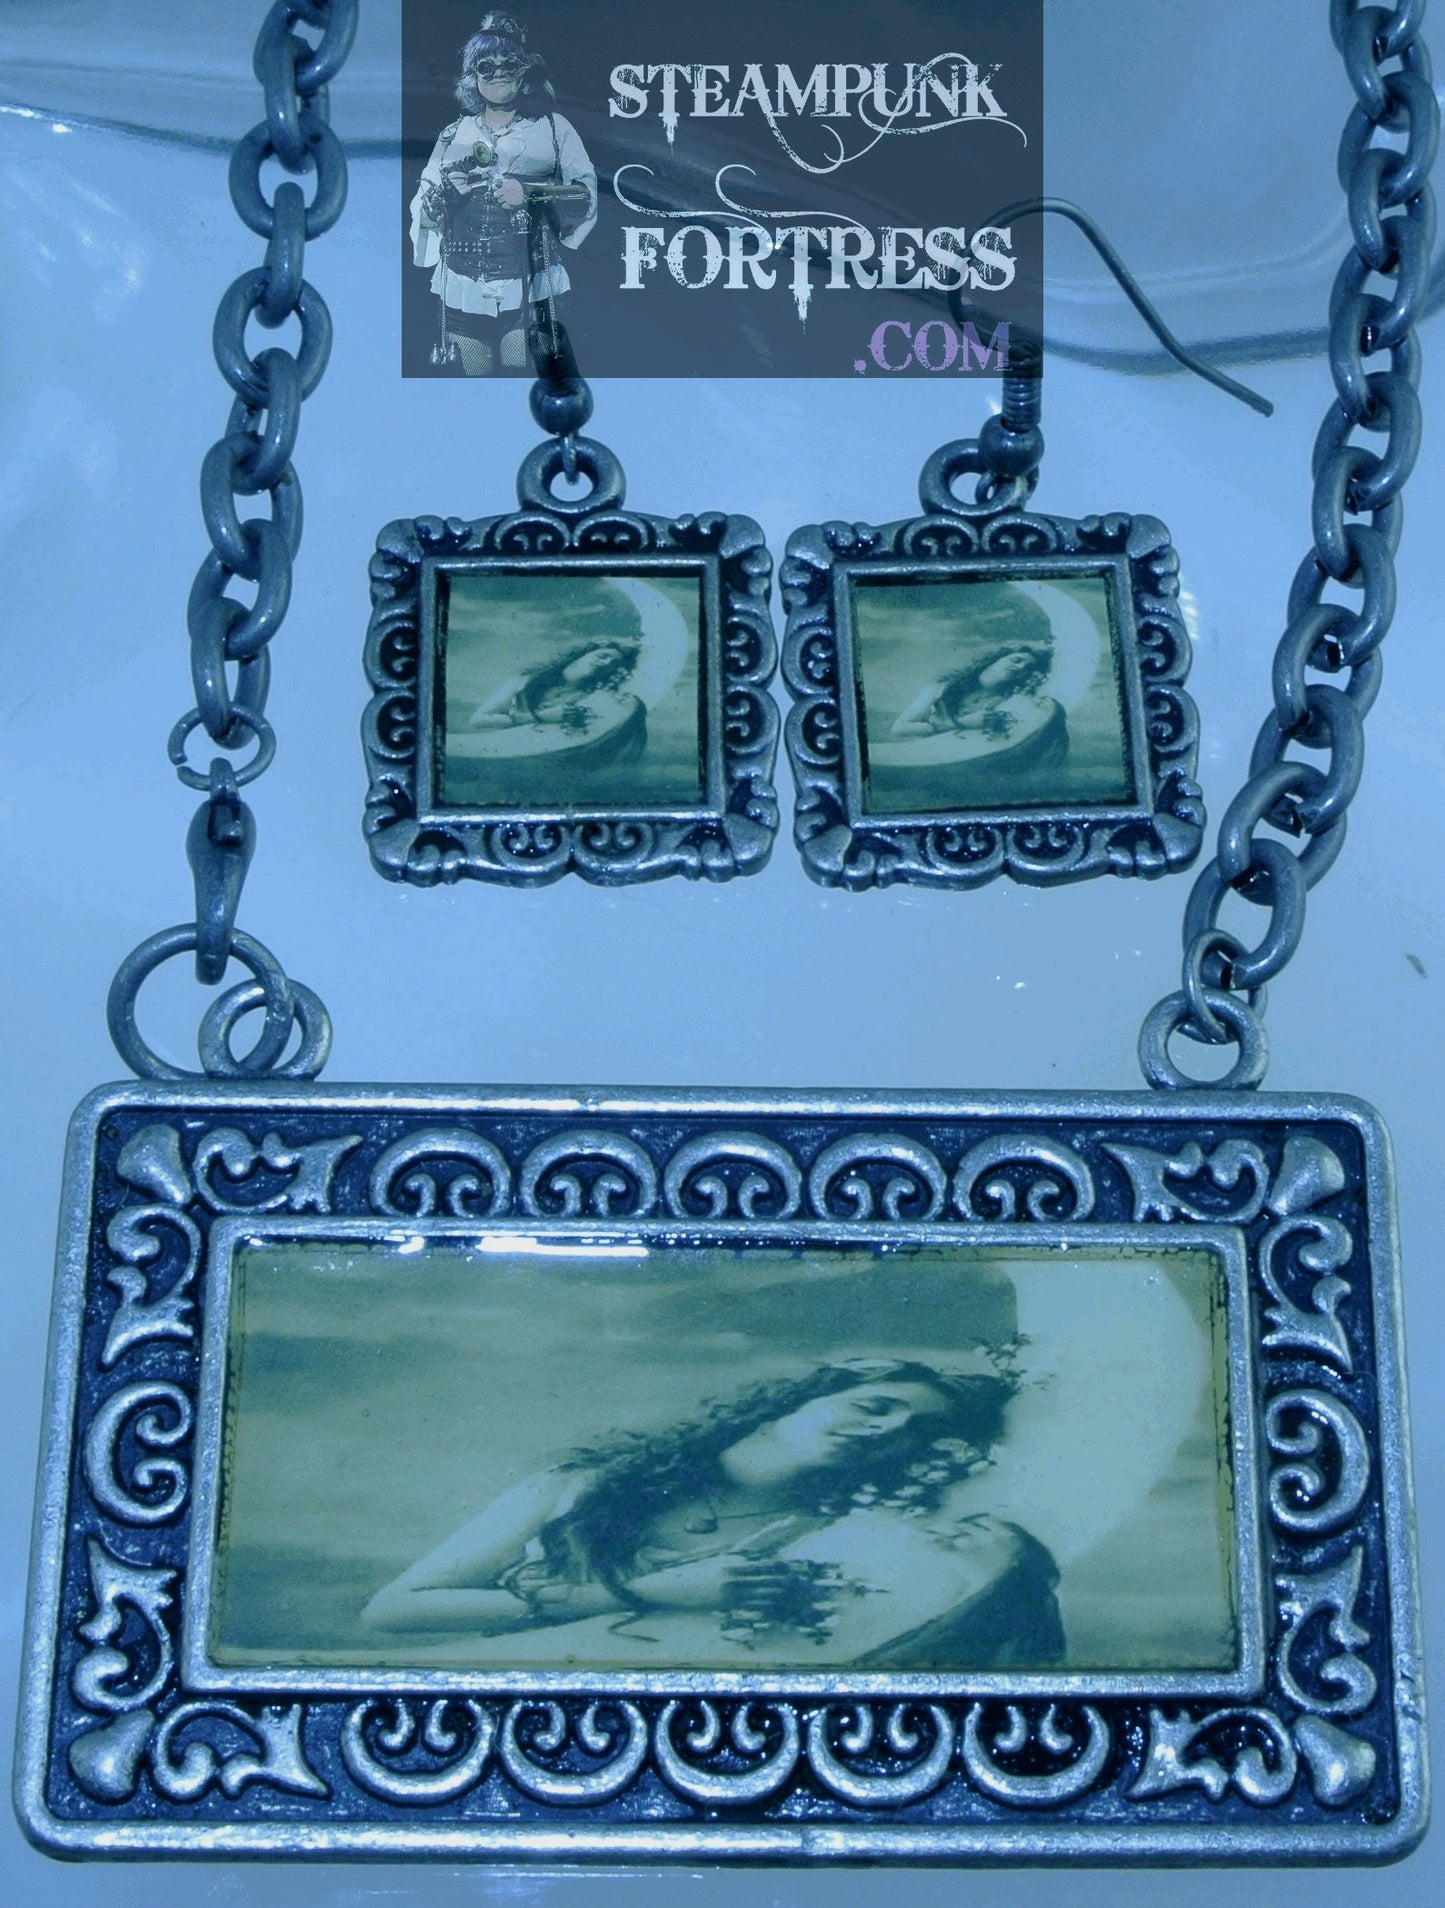 SILVER VINTAGE LADIES LADY HUGGING MOON SEPIA RECTANGLE GUNMETAL NECKLACE SET AVAILABLE STARR WILDE STEAMPUNK FORTRESS